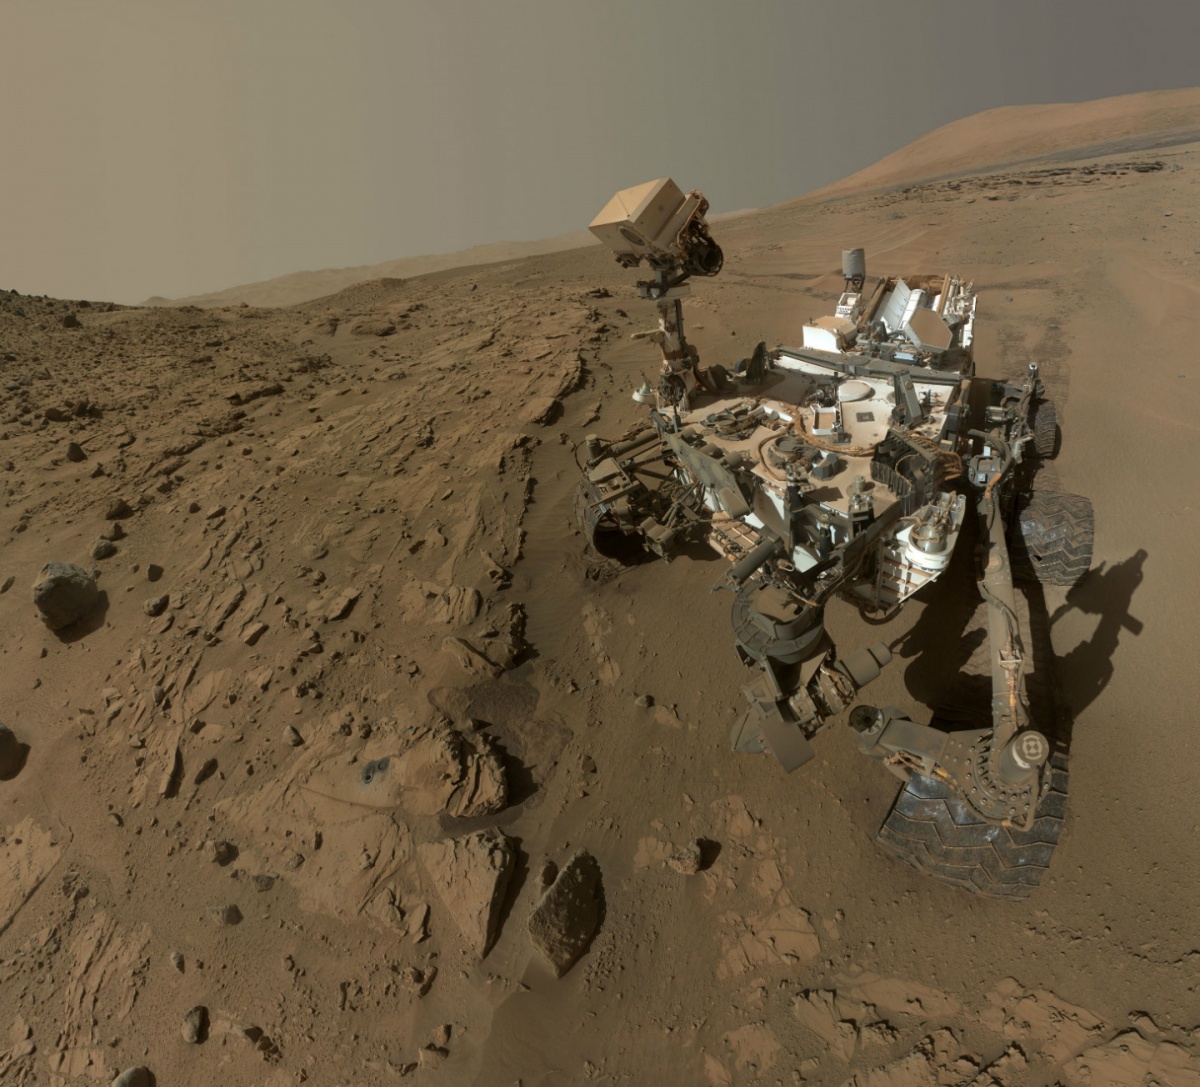 A small robot on wheels with metal arms and a camera mounted on a pole moves over dirt and rock on the surface of Mars.